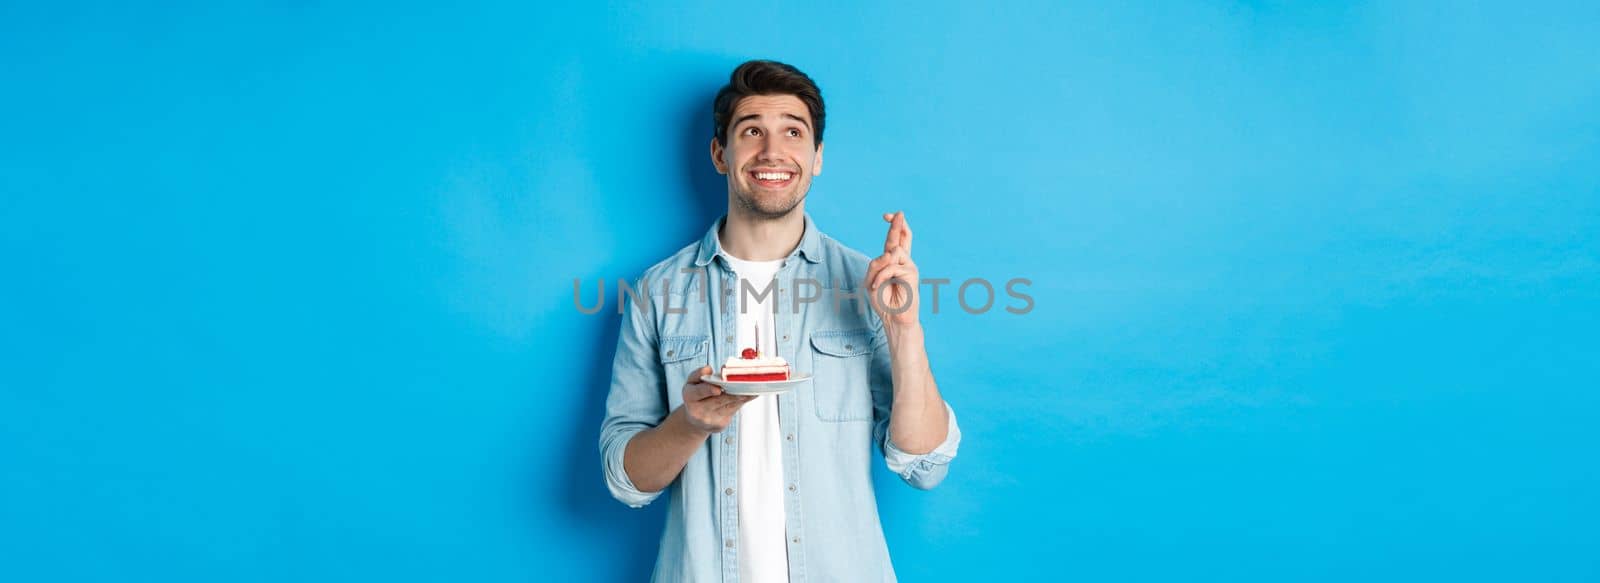 Handsome man making a wish, celebrating birthday, holding b-day cake and cross fingers, standing over blue background.